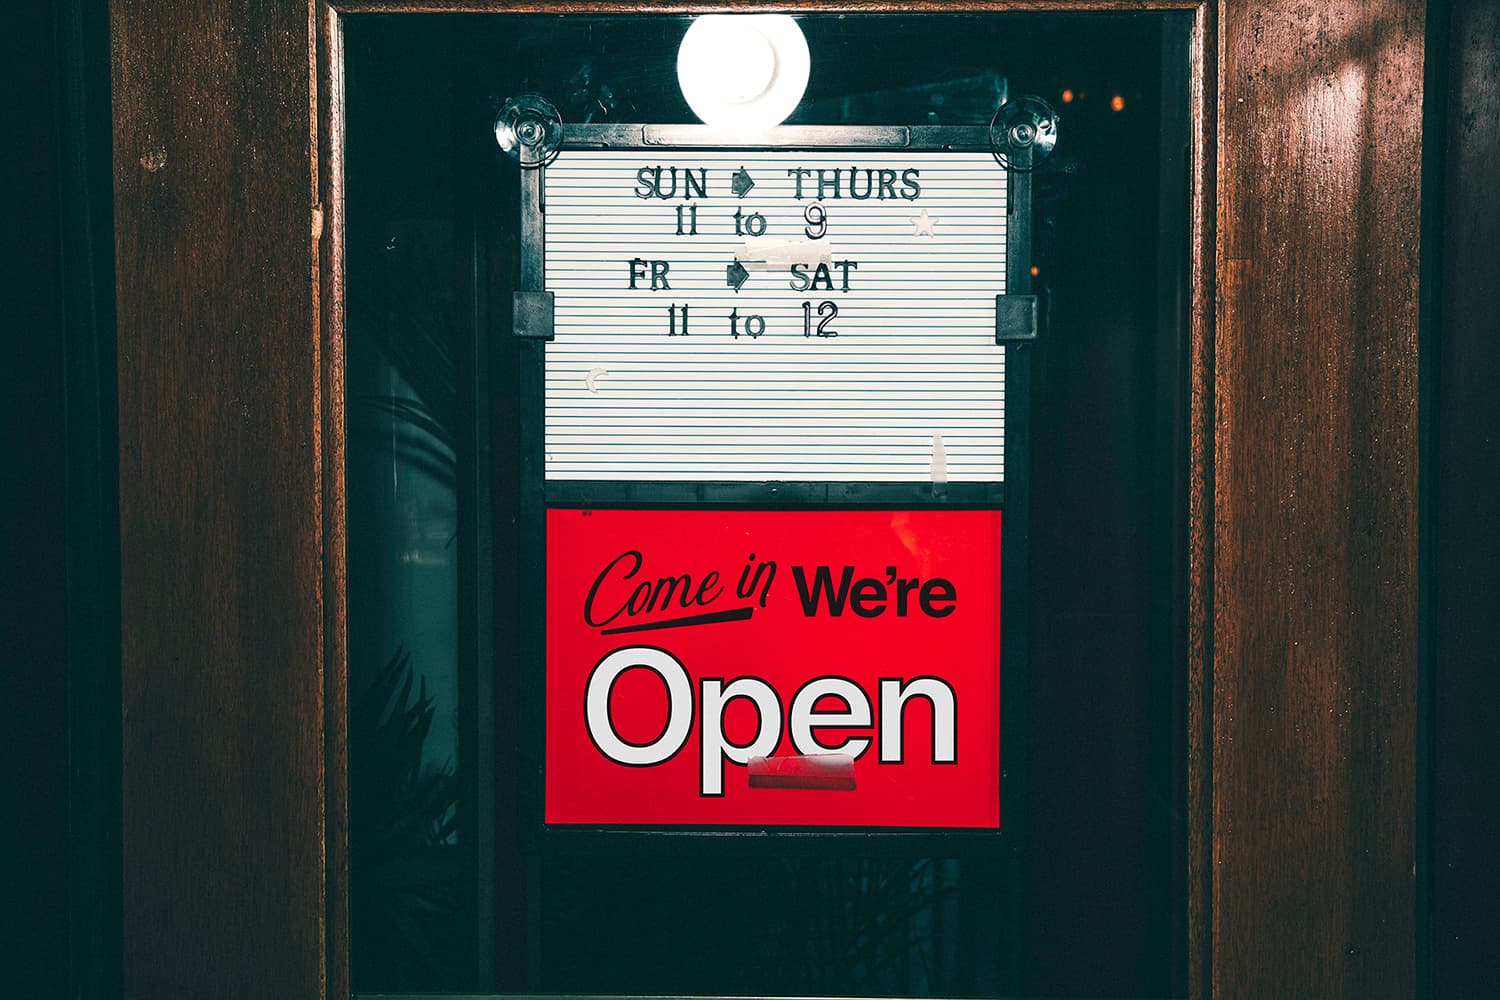 Wood-framed glass door with hours and "Come in we're open" signage